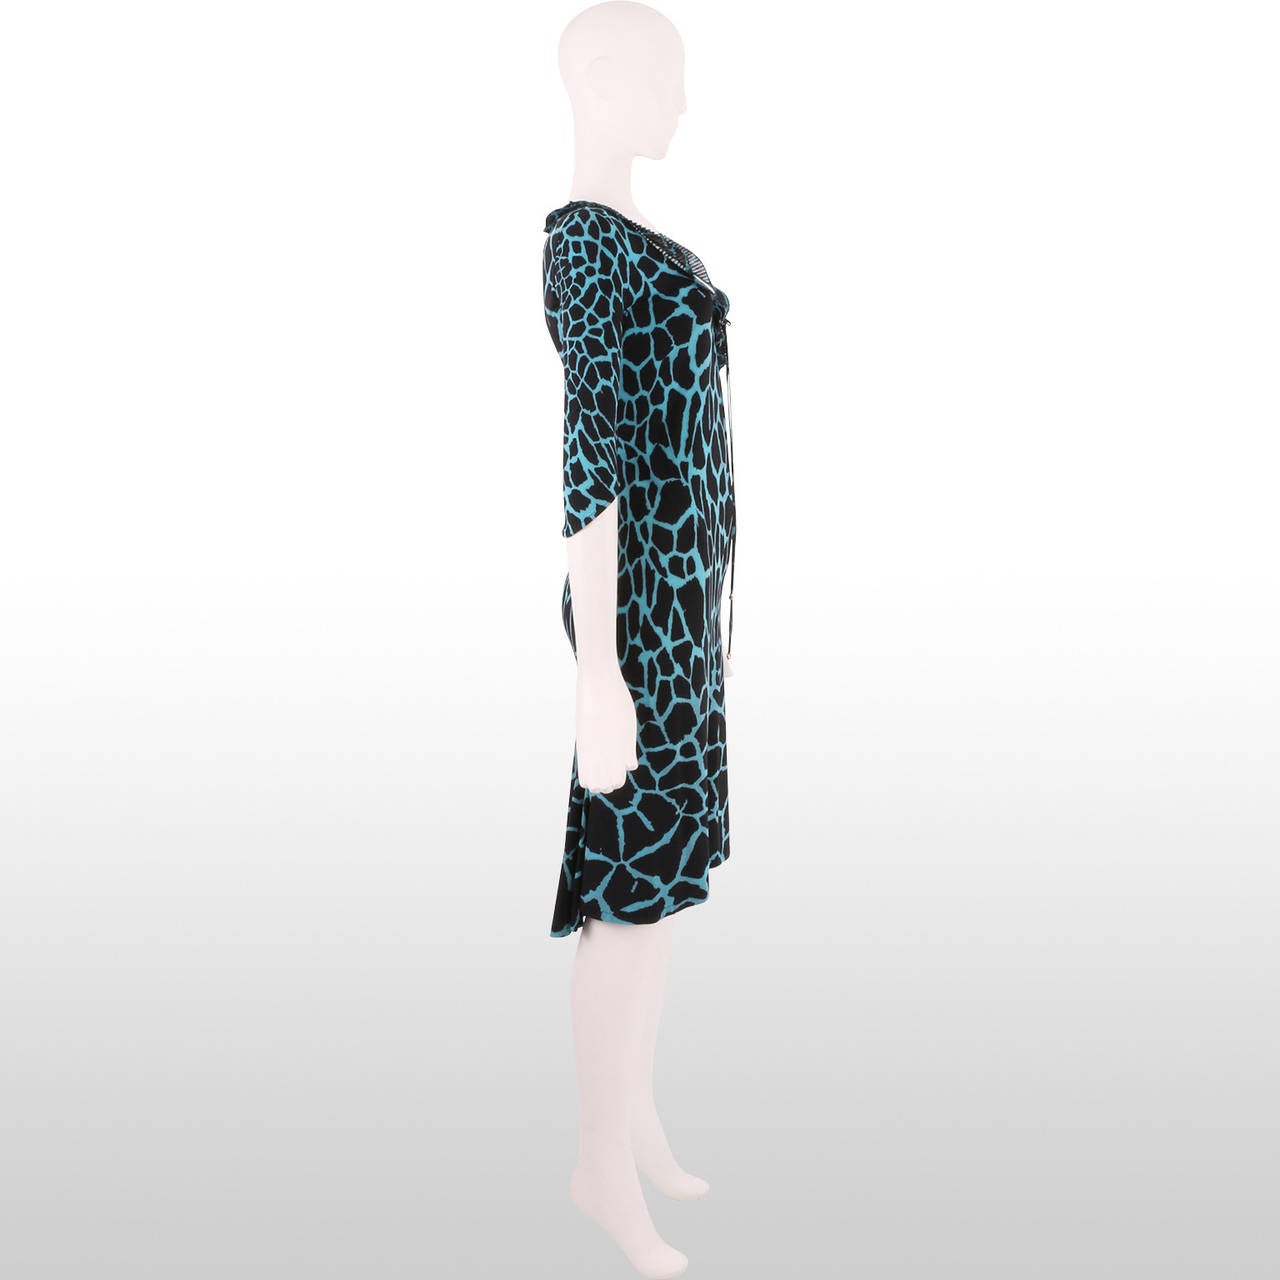 Roberto Cavalli Turquoise and Black Giraffe Print Jersey Dress In Excellent Condition For Sale In London, GB